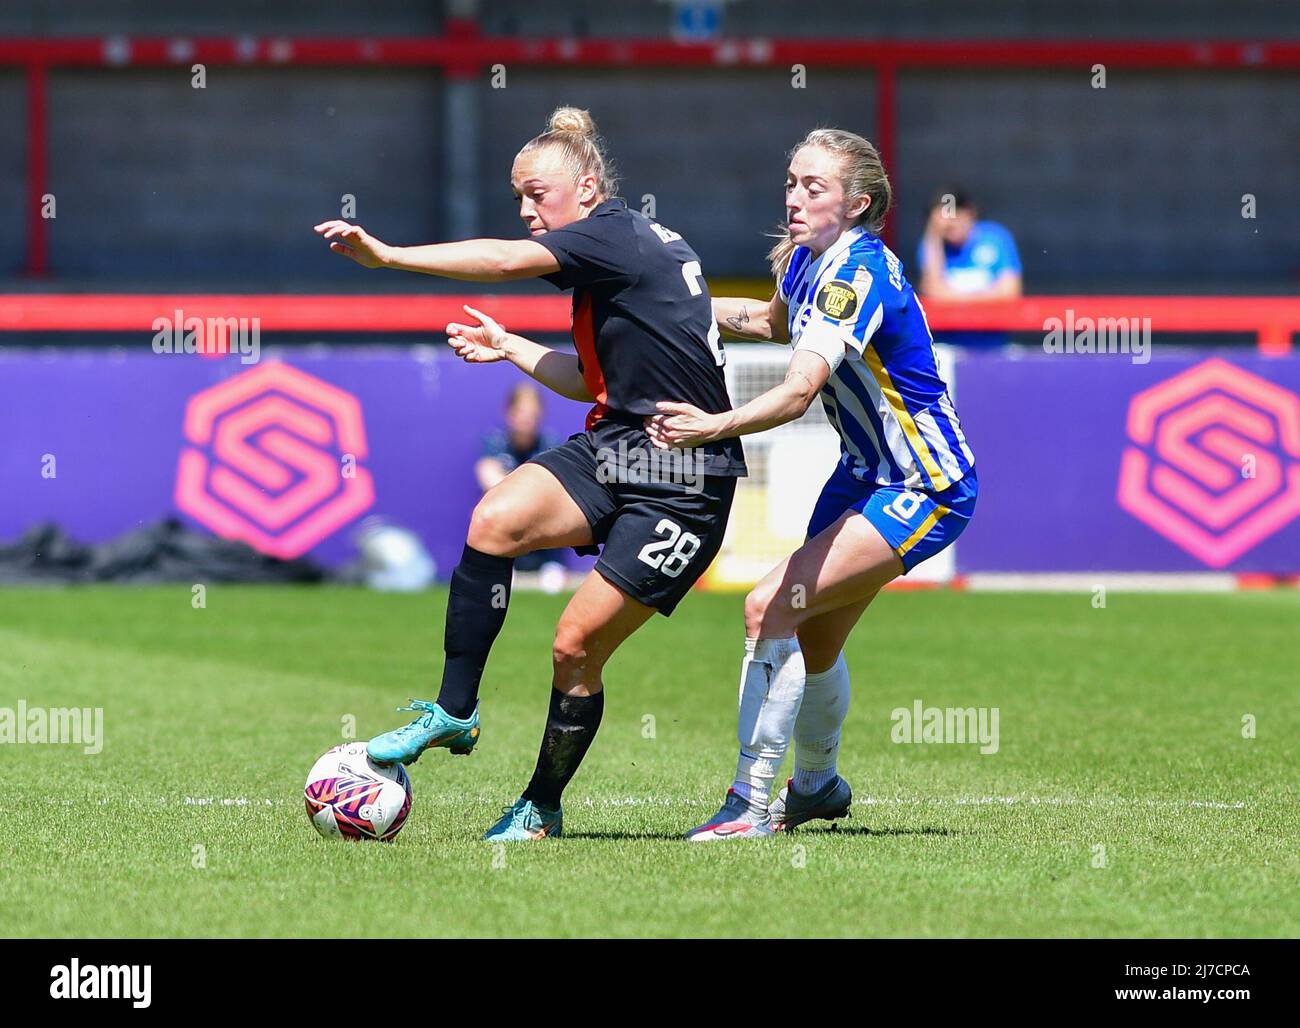 Megan Connolly of Brighton and Hove Albion and Hanna Bennison of Everton jostle for the ball during the FA Women's Super League match between Brighton & Hove Albion Women and Everton at The People's Pension Stadium on May 8th 2022 in Crawley, United Kingdom. (Photo by Jeff Mood/phcimages.com) Stock Photo